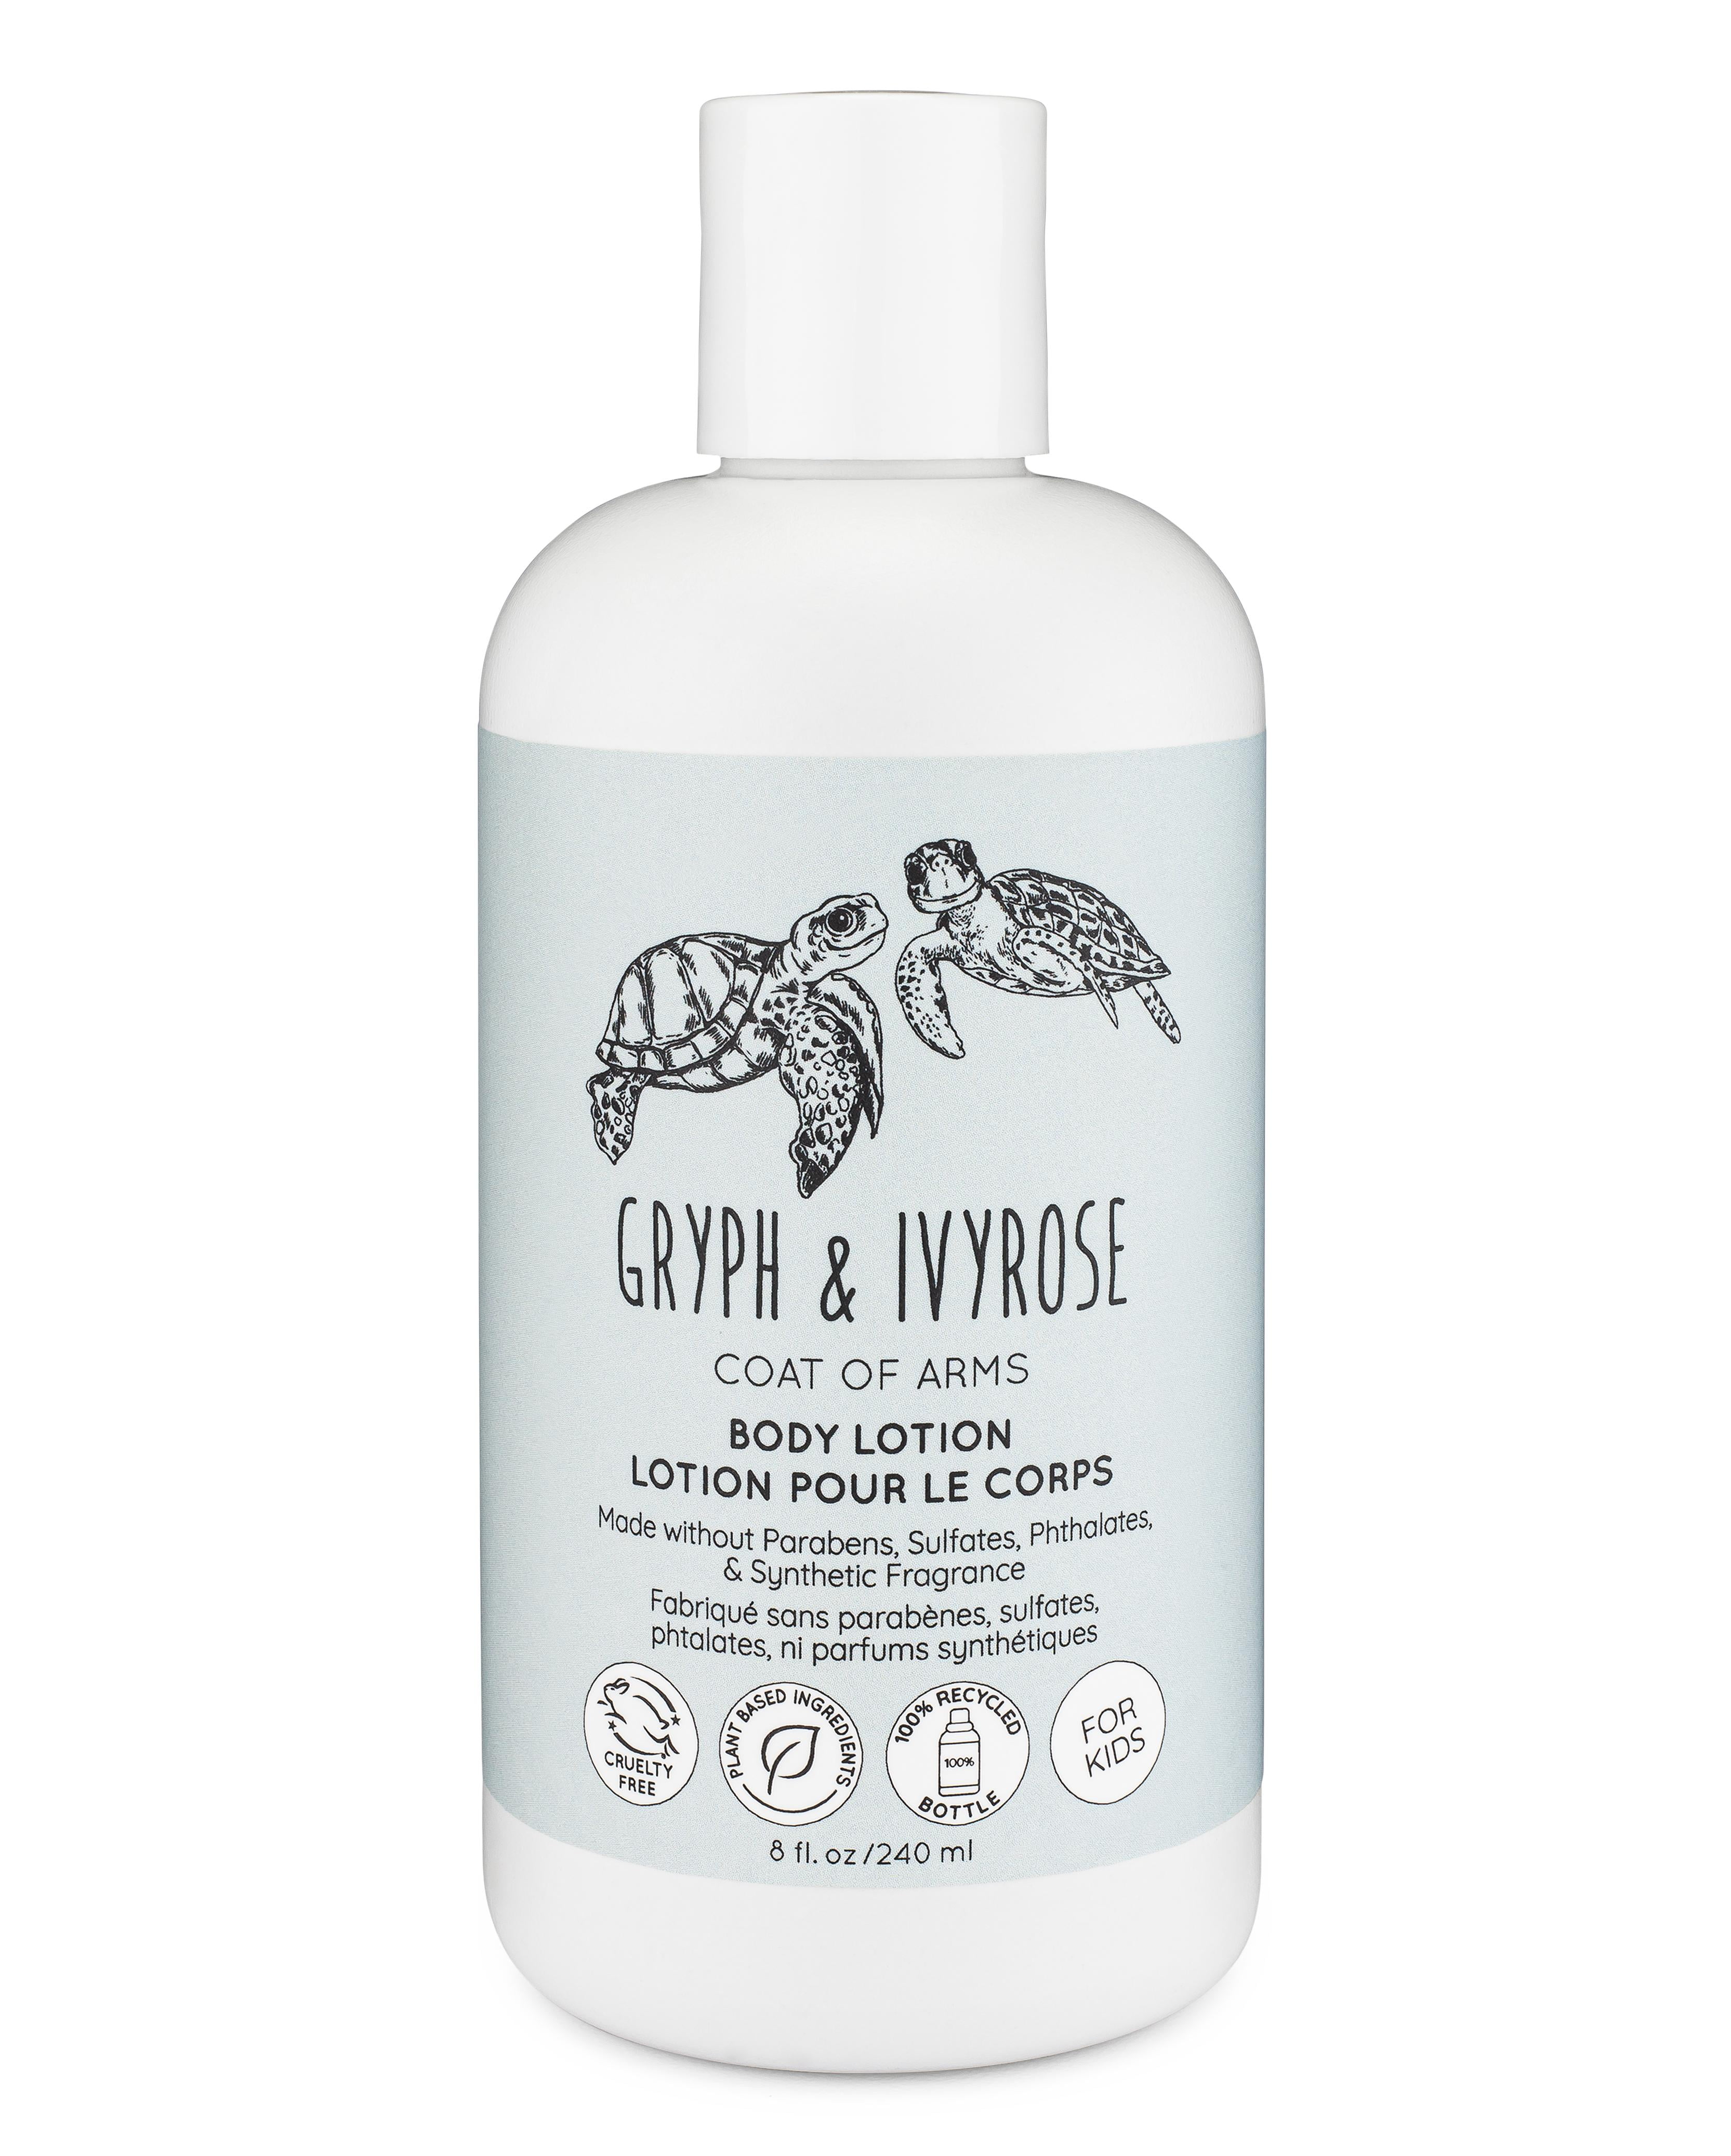 Gryph & IvyRose Coat of Arms Hydrating Lotion for Kids and Sensitive Skin - With Shea Butter & Coconut Oil - All Natural, Sustainable, Cruelty Free, No Parabens, No Sulfates, Vegan 8oz